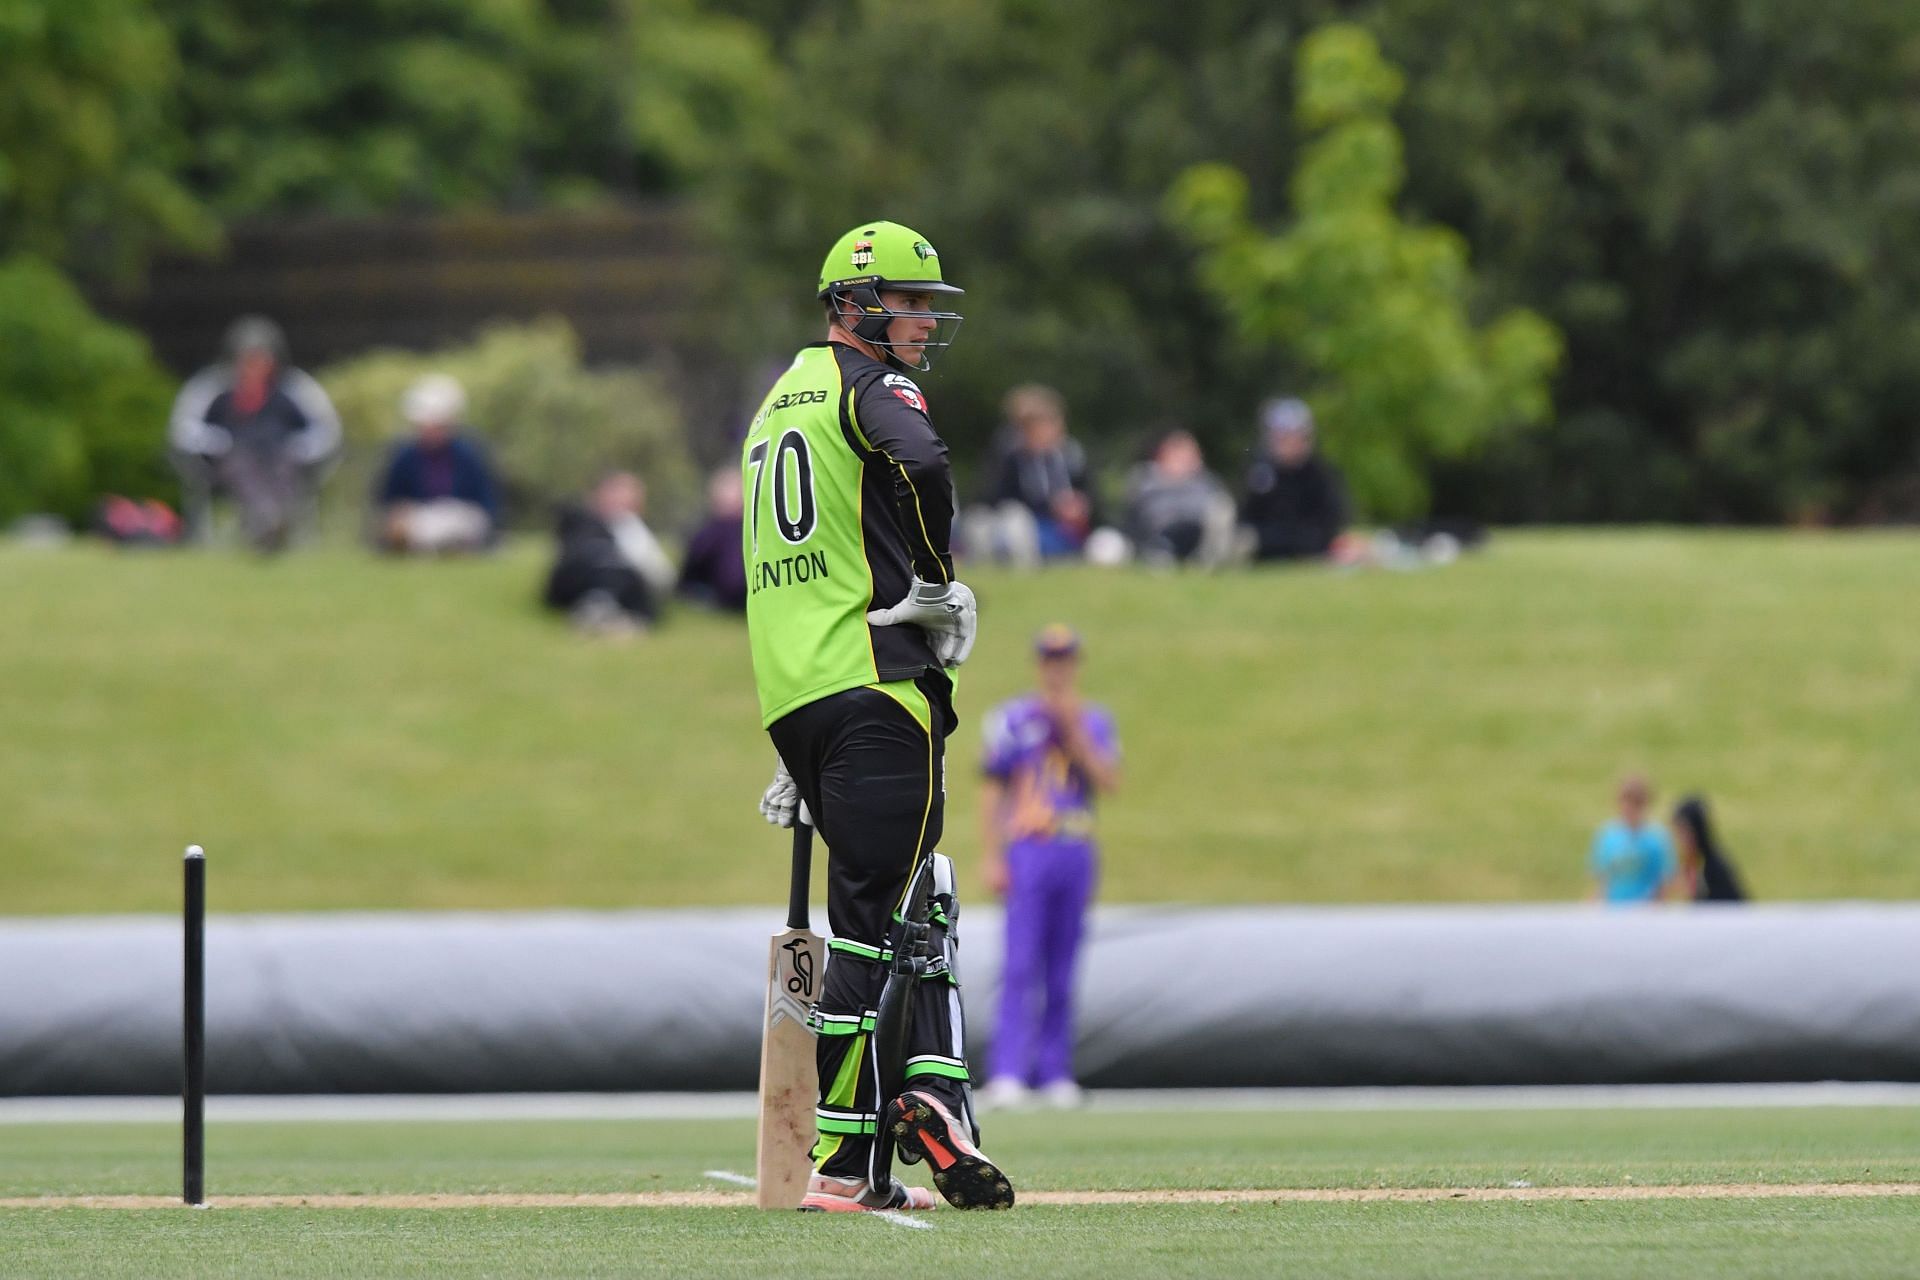 Jay Lenton was forced to play after several COVID cases in Sydney Sixers camp (Credit: Getty Images)